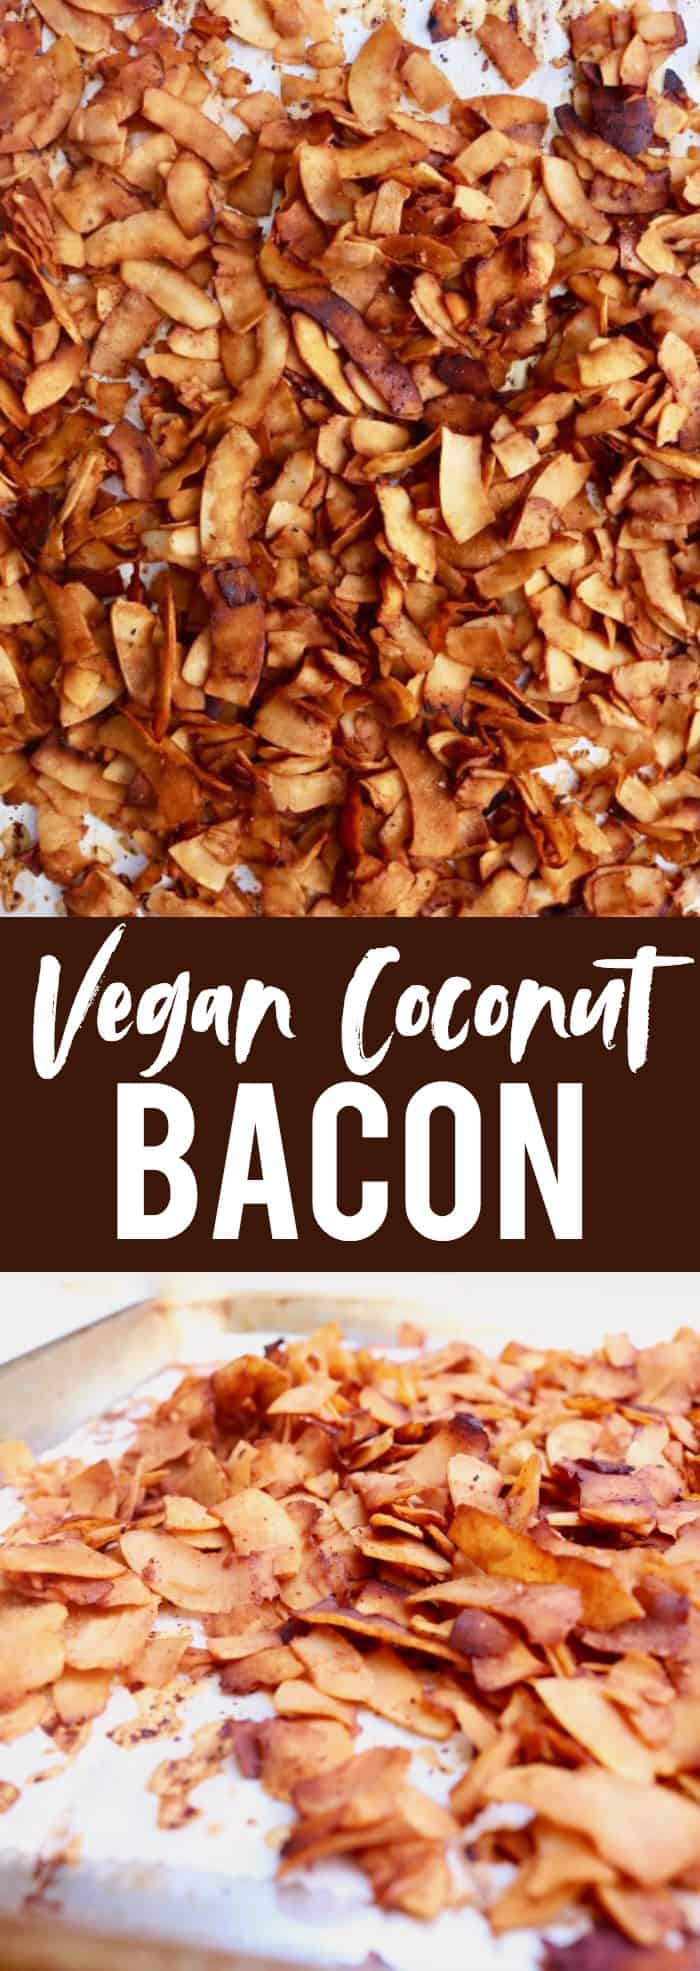 Whether you're vegan or not, this coconut bacon is a MUST TRY!! Such a fun, healthy, plant-based option that's such a tasty sub for traditional bacon! thetoastedpinenut.com #vegan #healthy #bacon #glutenfree #paleo